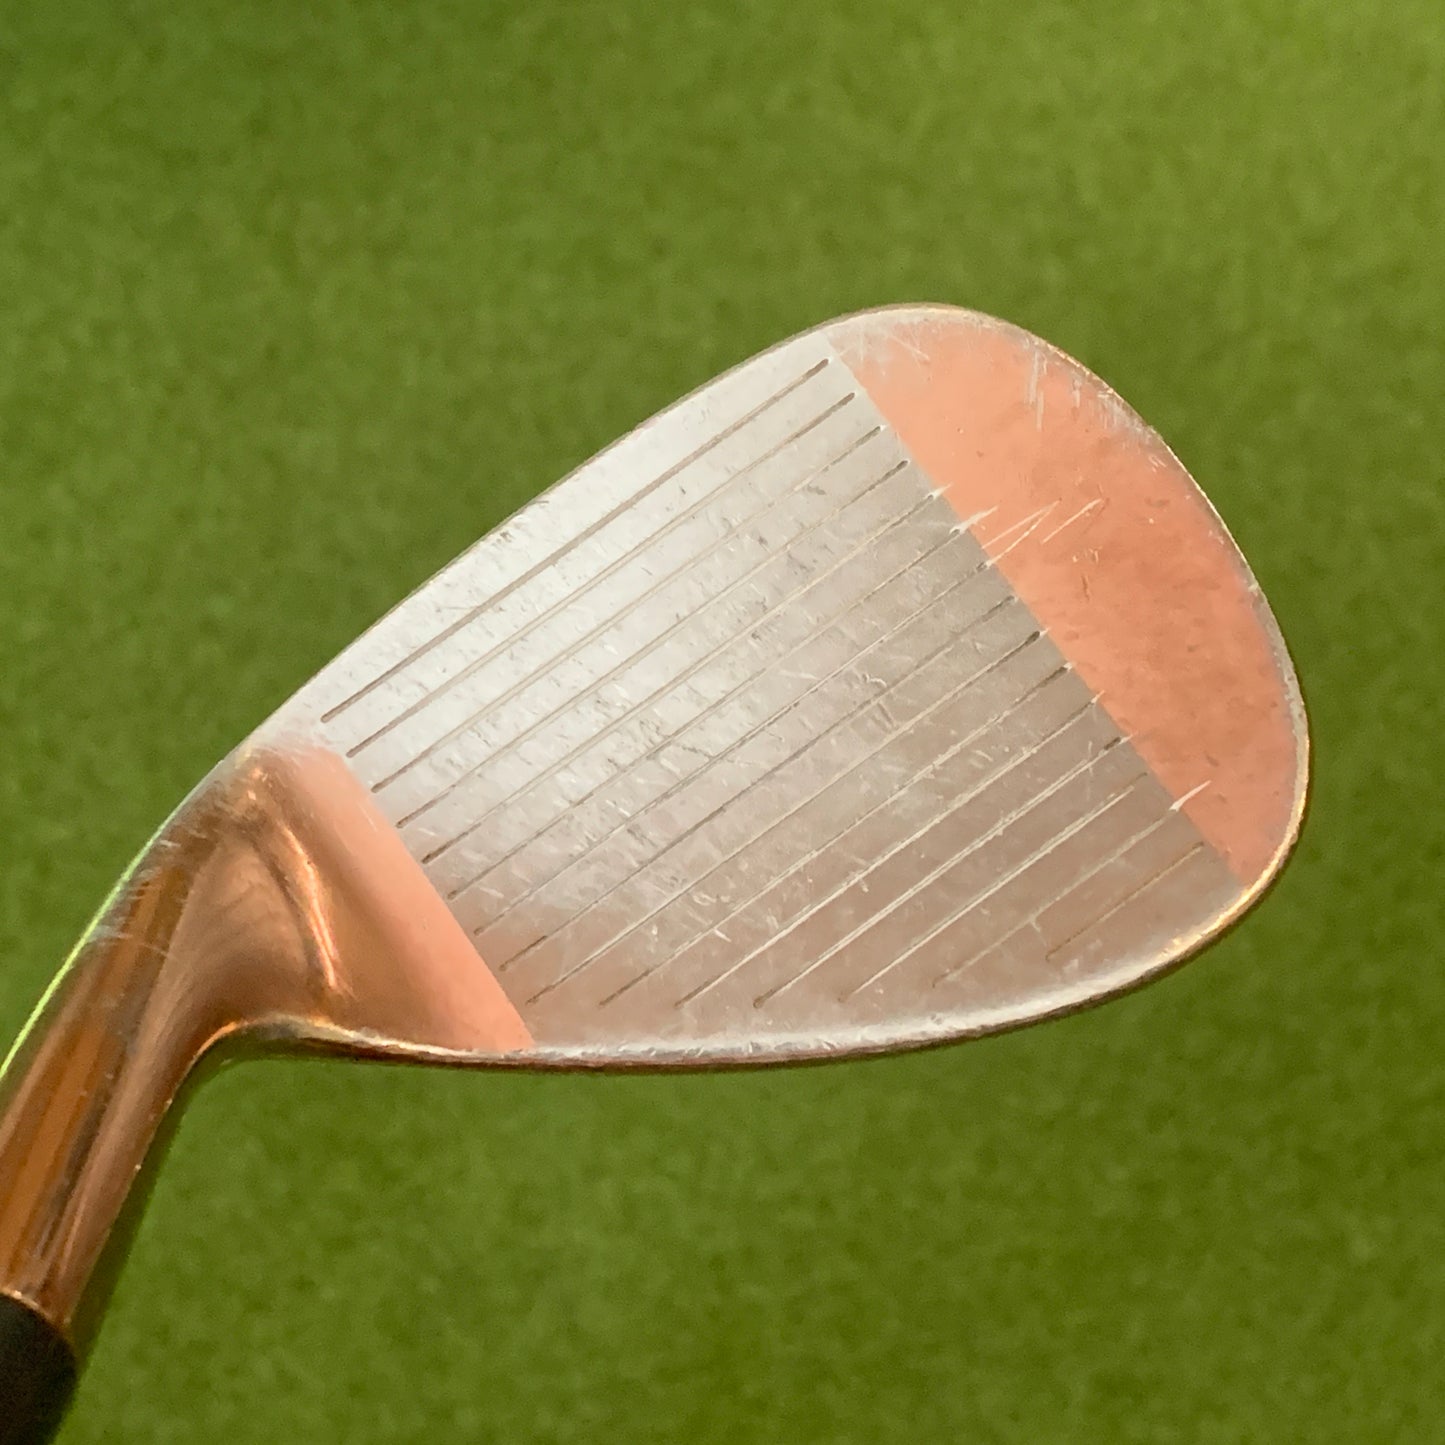 RH Power Play Raw Spin (56) Sand Wedge